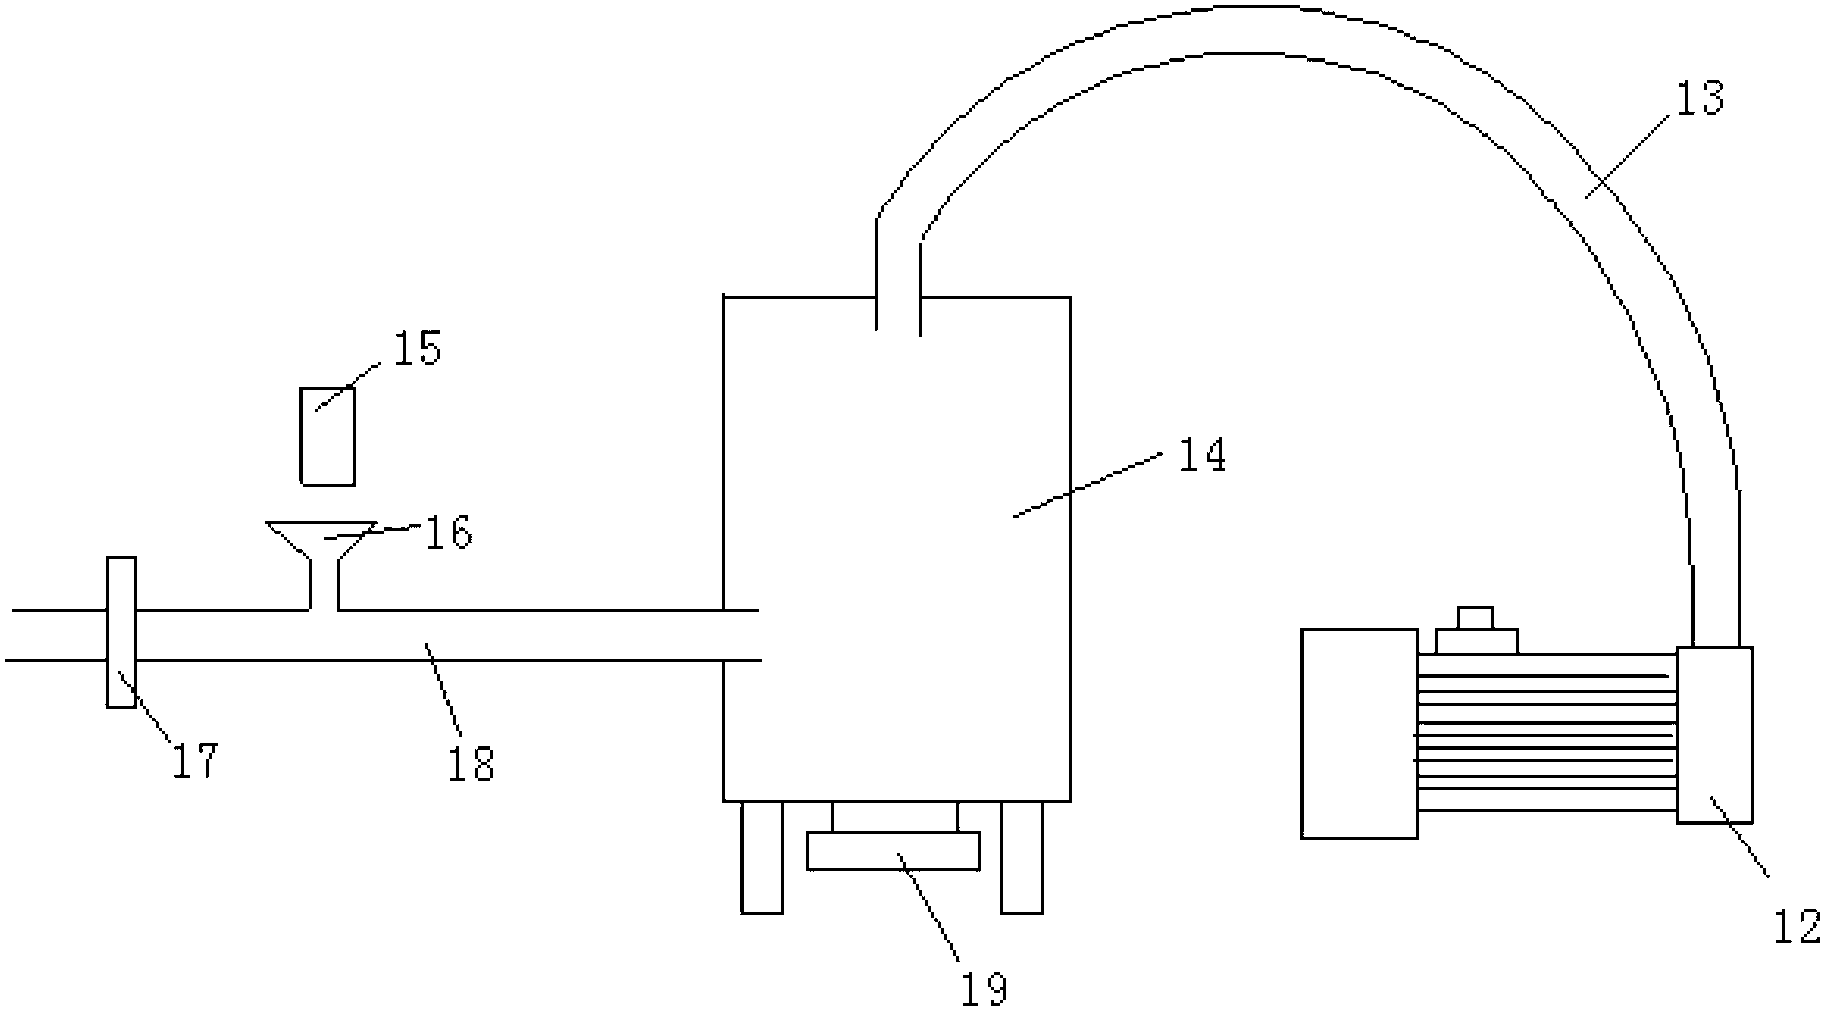 Method for mechanically separating river crab shell and meat